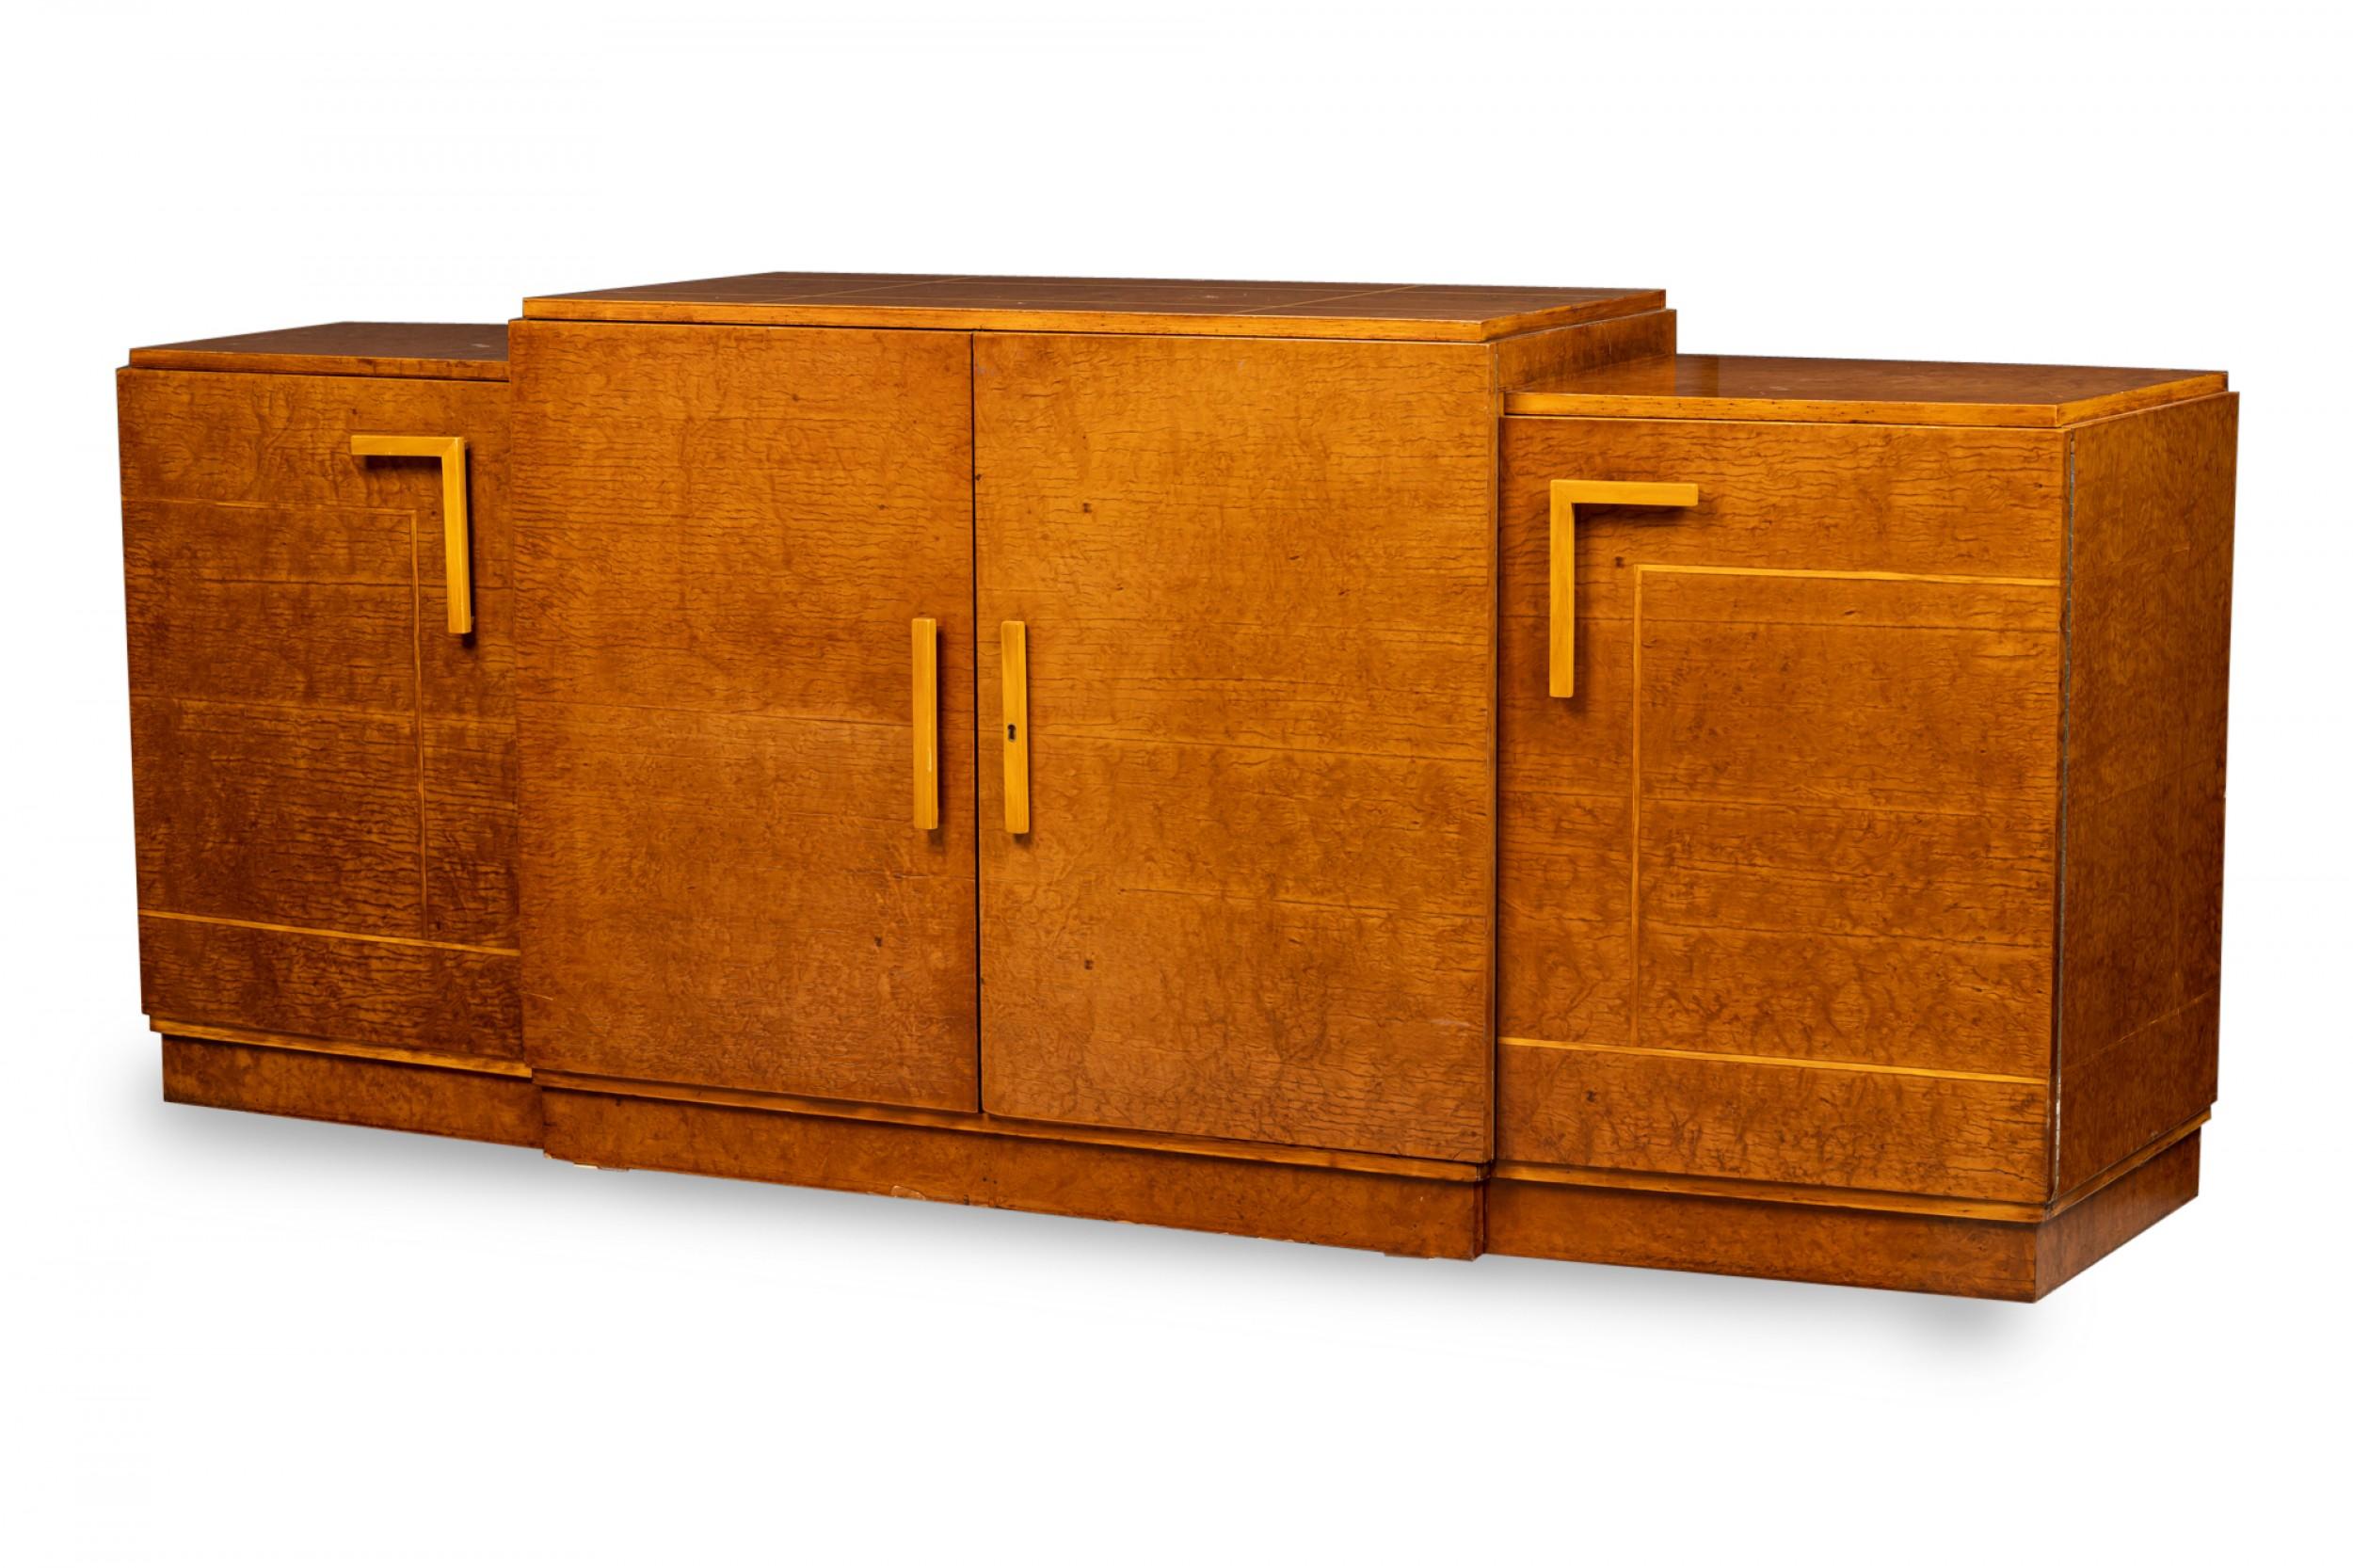 Art Deco (1930s) American birds-eye inlaid maple credenza composed of 3 cabinet components with a burled veneer, decorated with inlaid banding, 4 doors (with geometric rectangular pulls) opening to reveal 2 columns of pullout drawers from the side